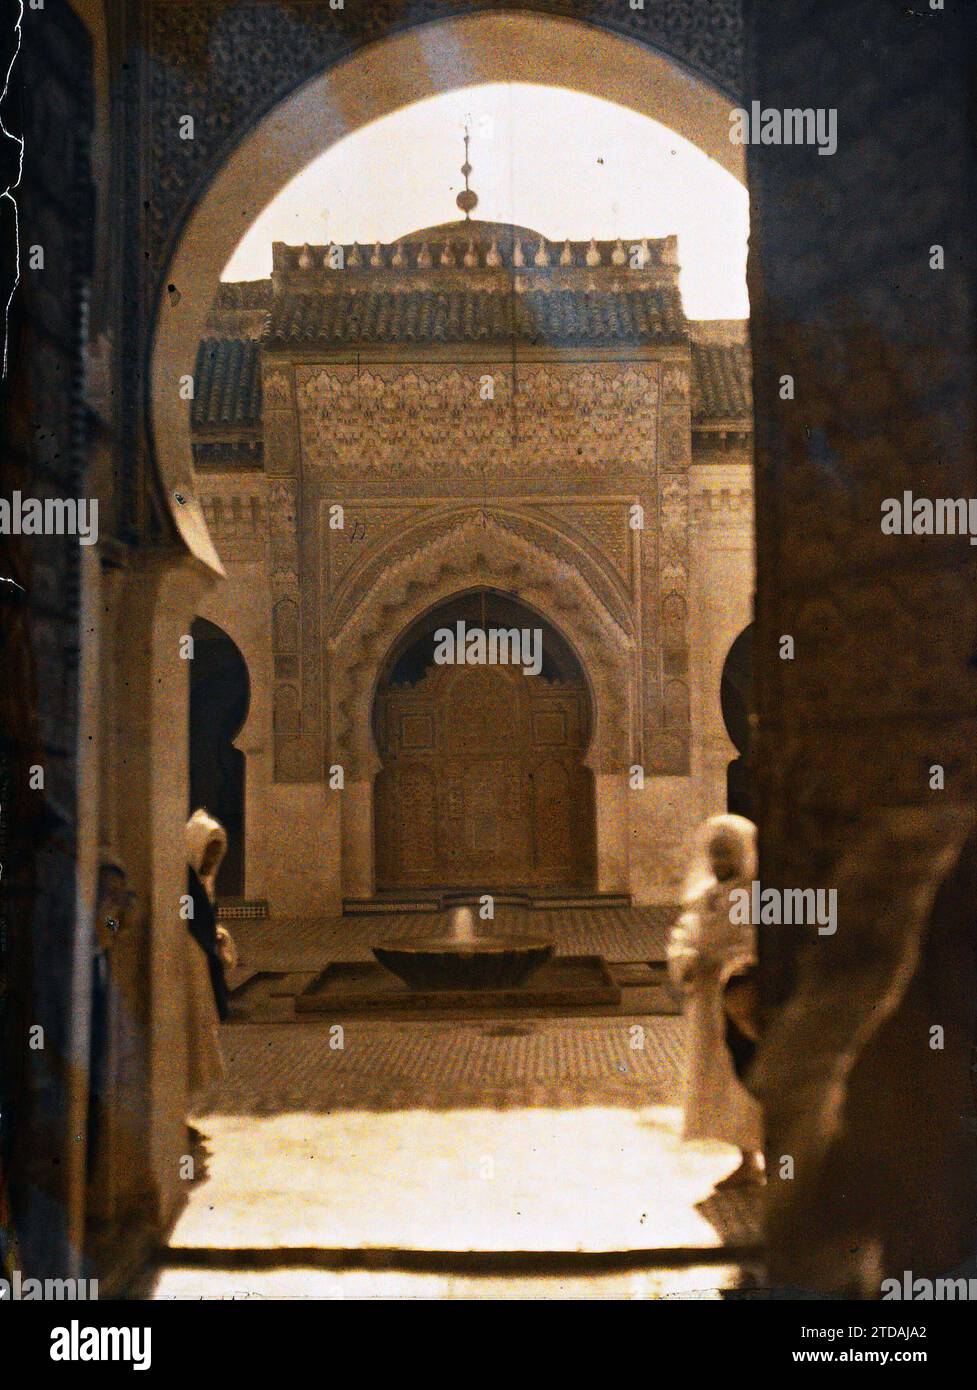 Fez, Morocco View of the central nave from the Rose Gate of the el Qarayouine mosque-university, Religion, HD, Art, Habitat, Architecture, Islam, exists in high definition, Sculpture, Painting, Patio, Hydraulic installation, Fountain, Stucco, Basin, Religious architecture, Morocco, Fez, Courtyard of the Moulay Idriss mosque, Fès, 01/01/1913 - 31/01/1913, Passet, Stéphane, photographer, 1912-1913 - Maroc - Stéphane Passet - (December-January), Autochrome, photo, Glass, Autochrome, photo, Positive, Vertical, Size 9 x 12 cm Stock Photo